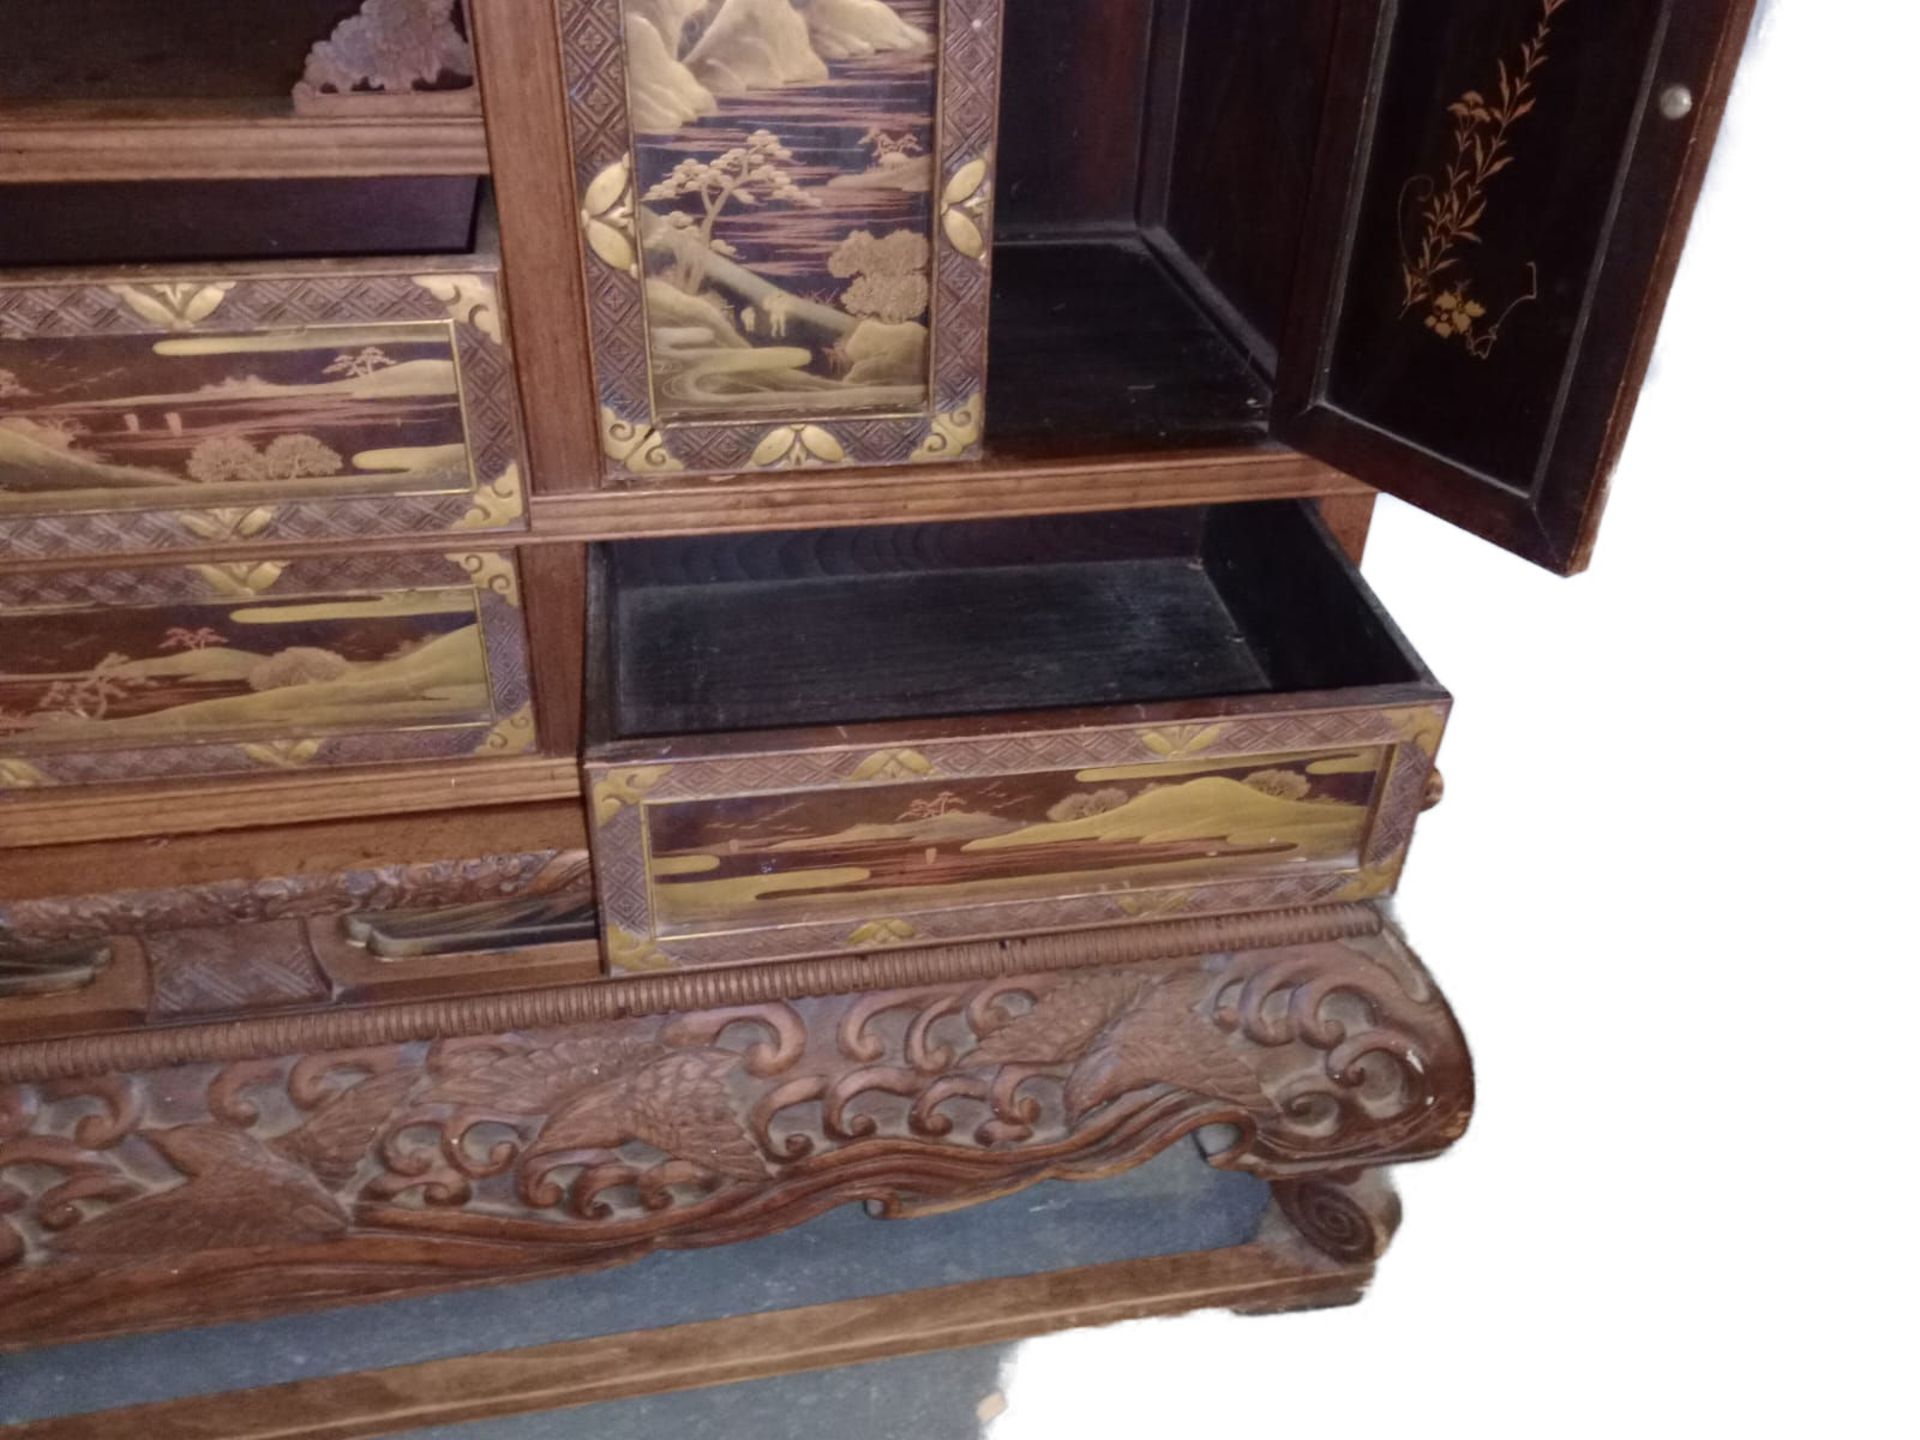 LATE 19TH CENTURY JAPANESE MEIJI LACQUER BOOKCASE CABINET - Image 5 of 10